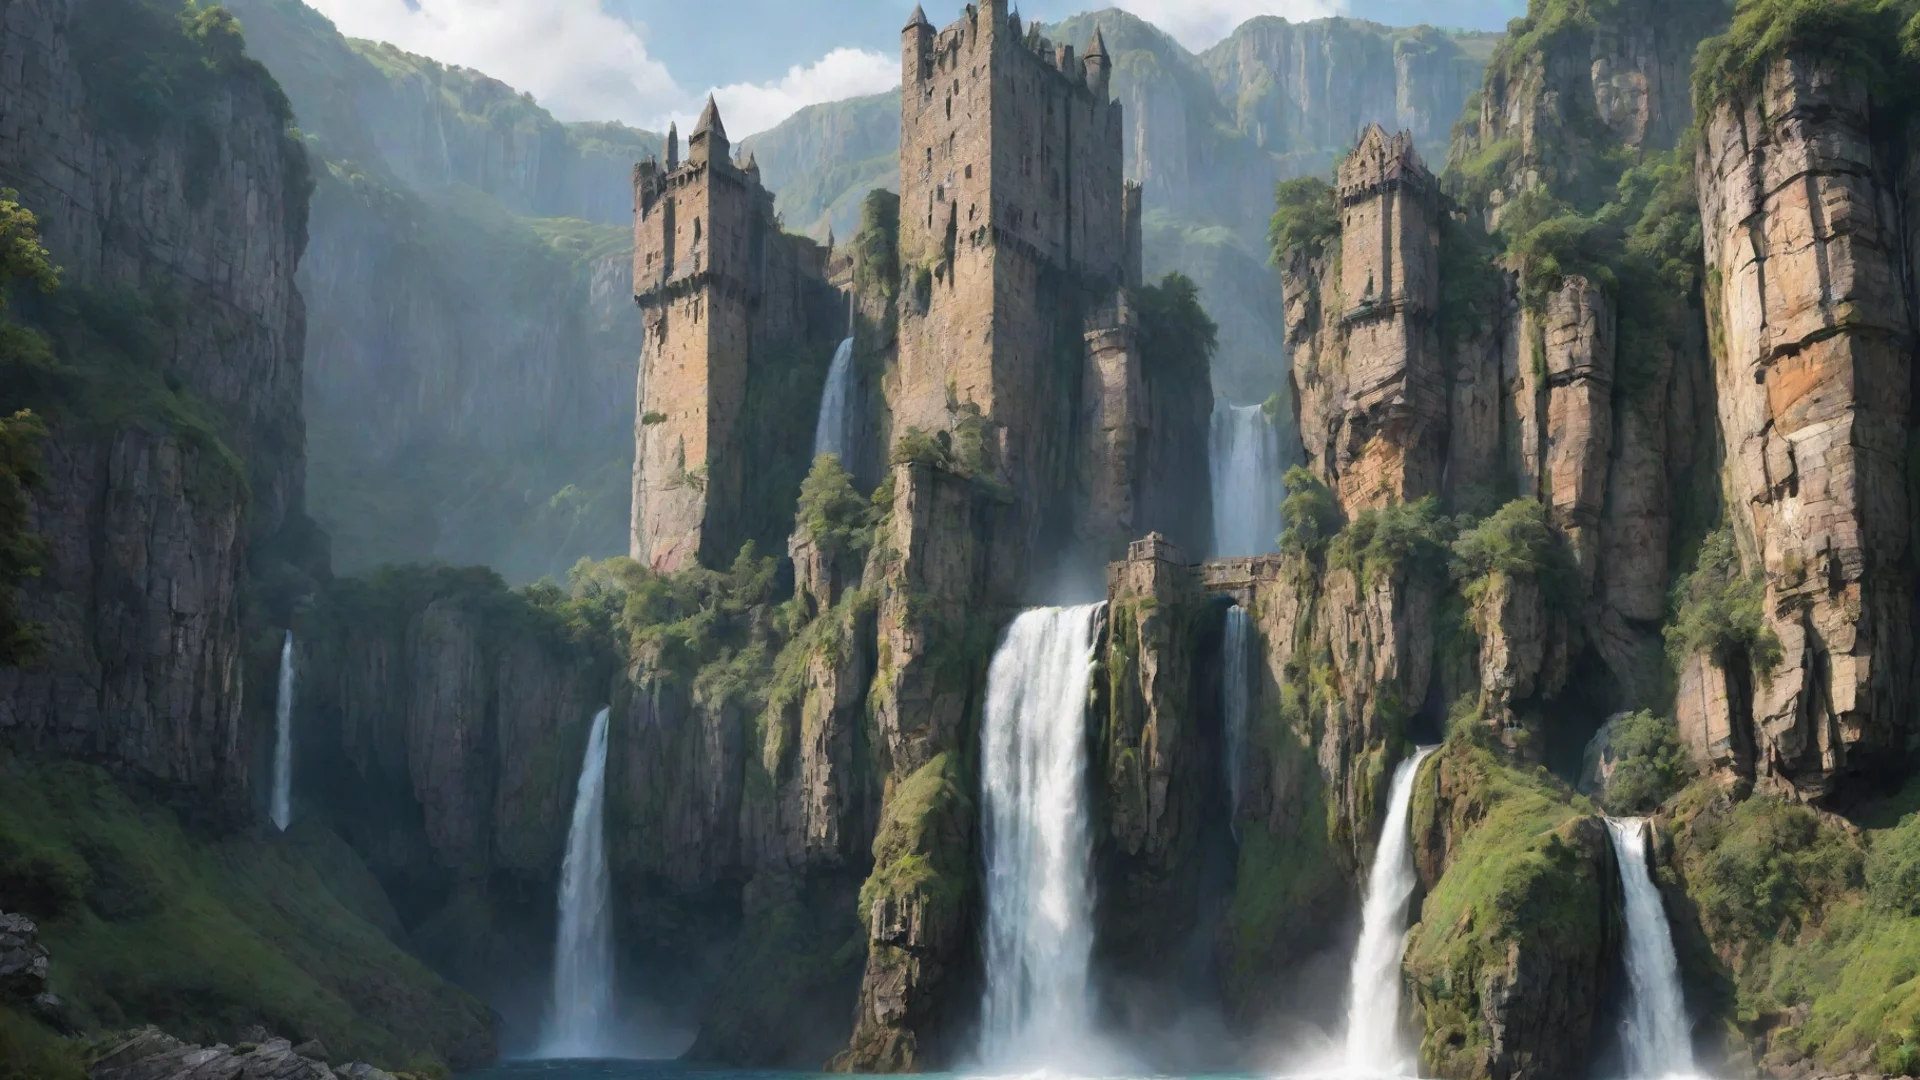 aiamazing castle huge cliffs waterfalls relaxing environment hd aesthetic awesome portrait 2 wide